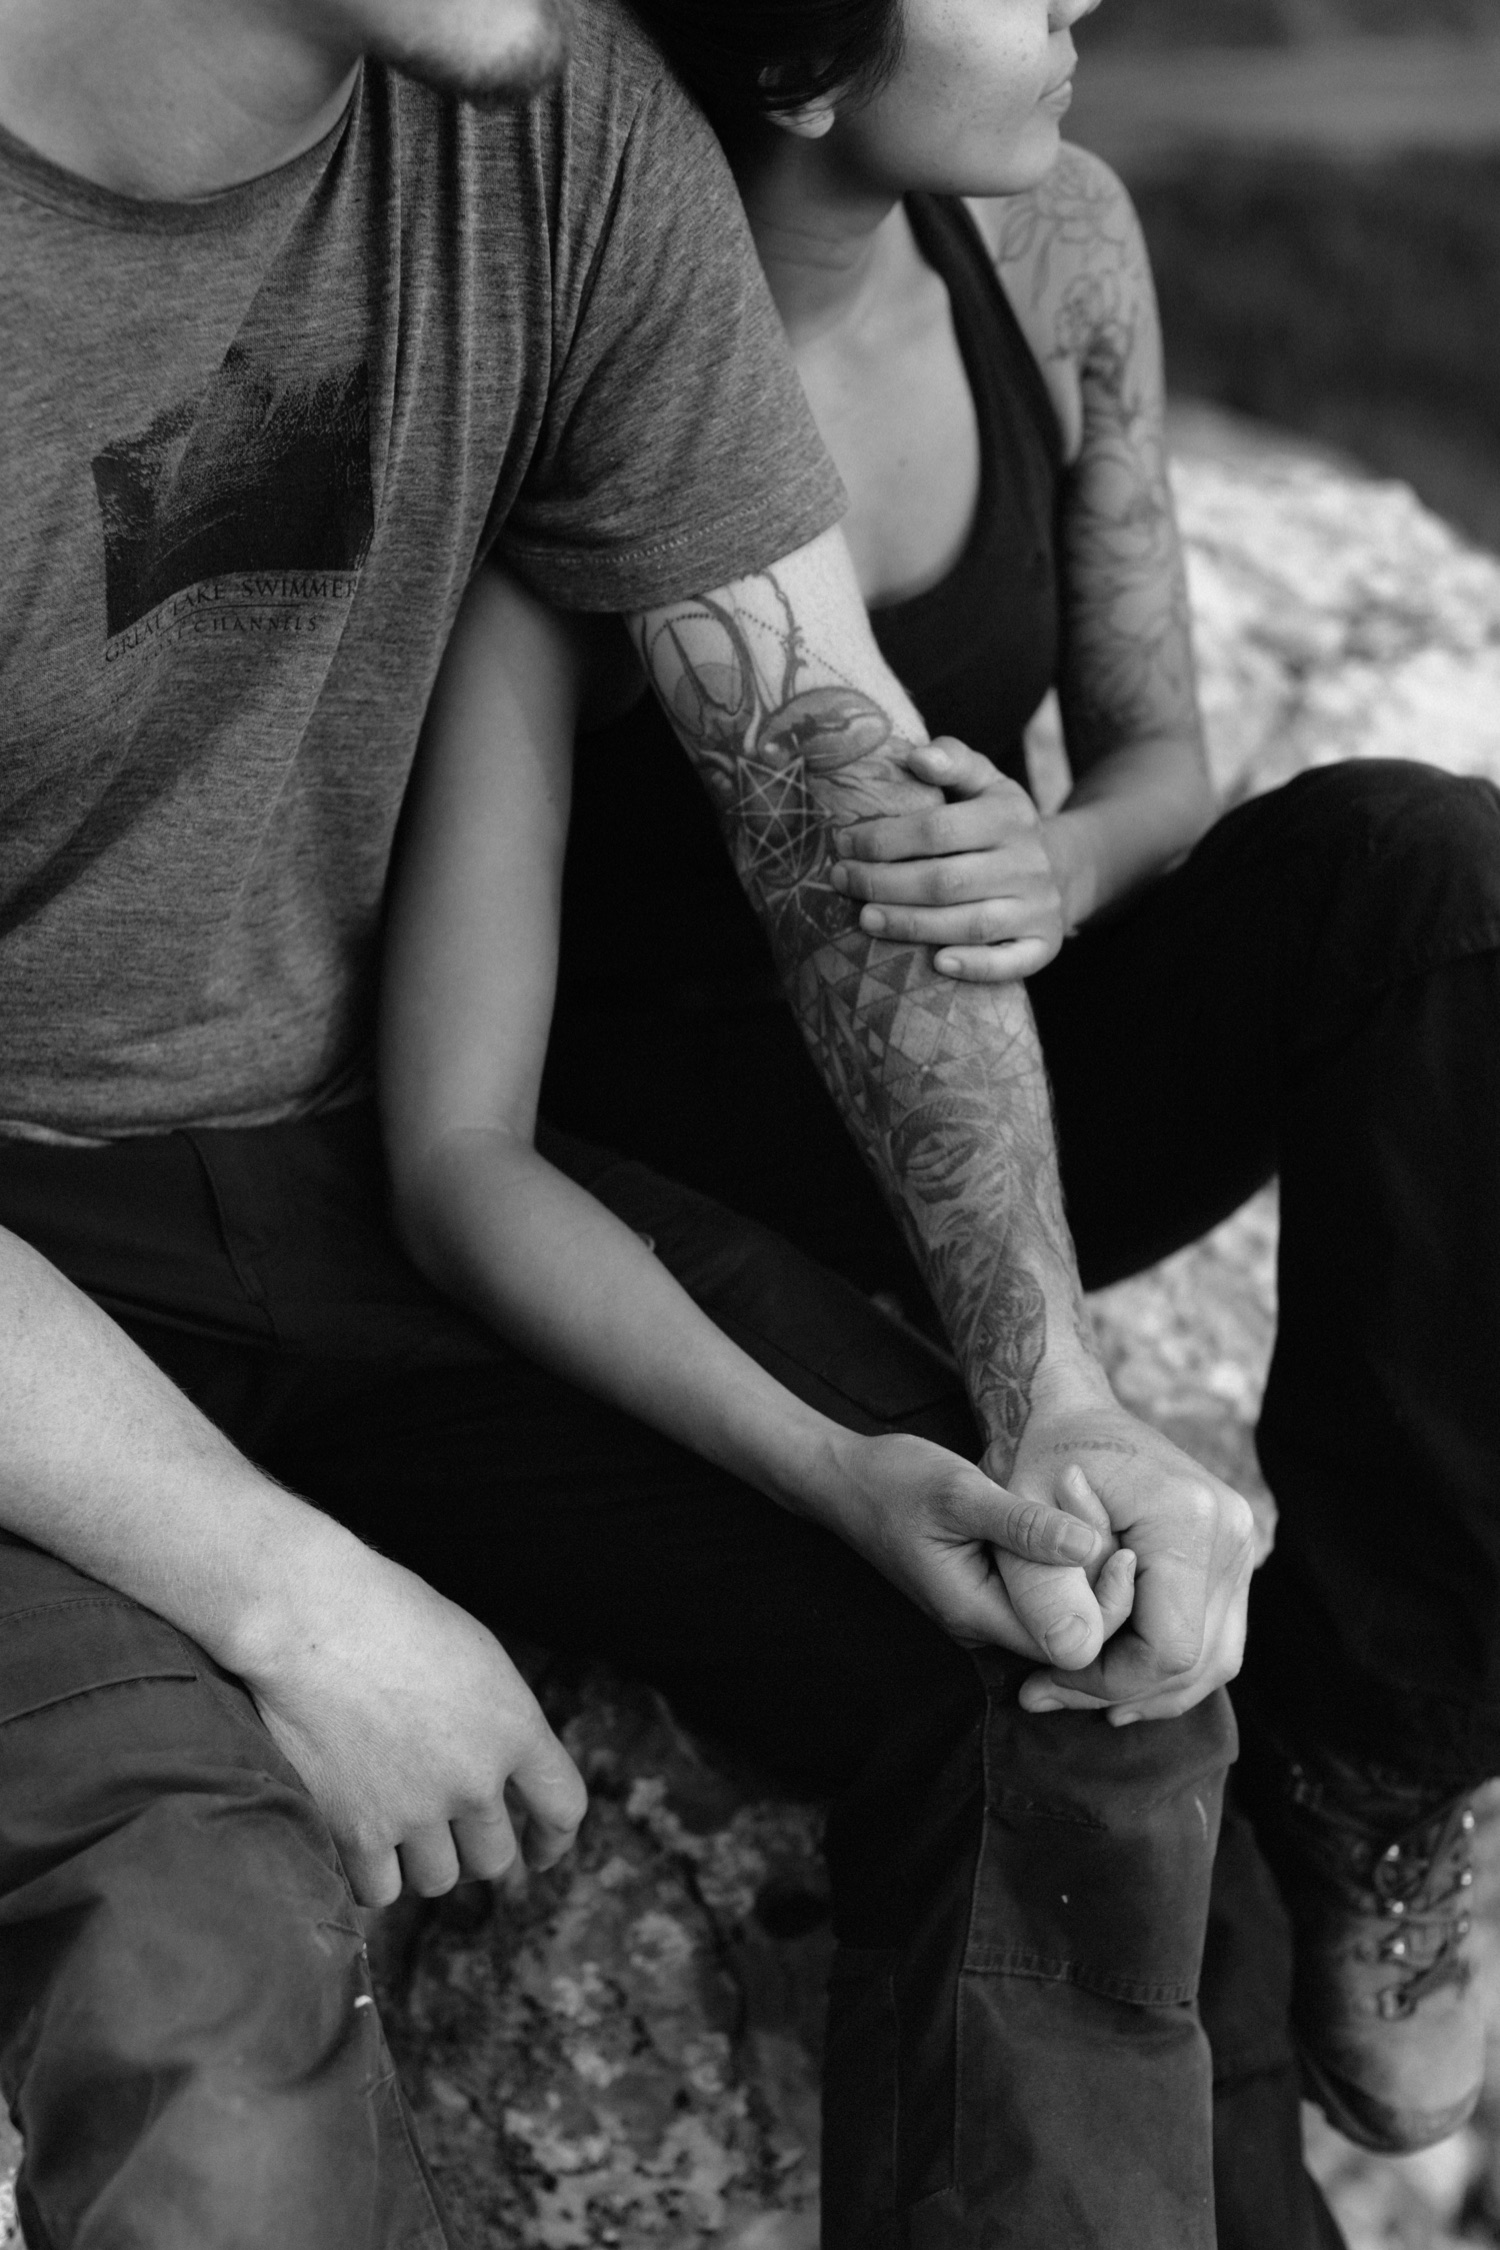 Couple embracing while sitting with interlocking hands with modern tattos